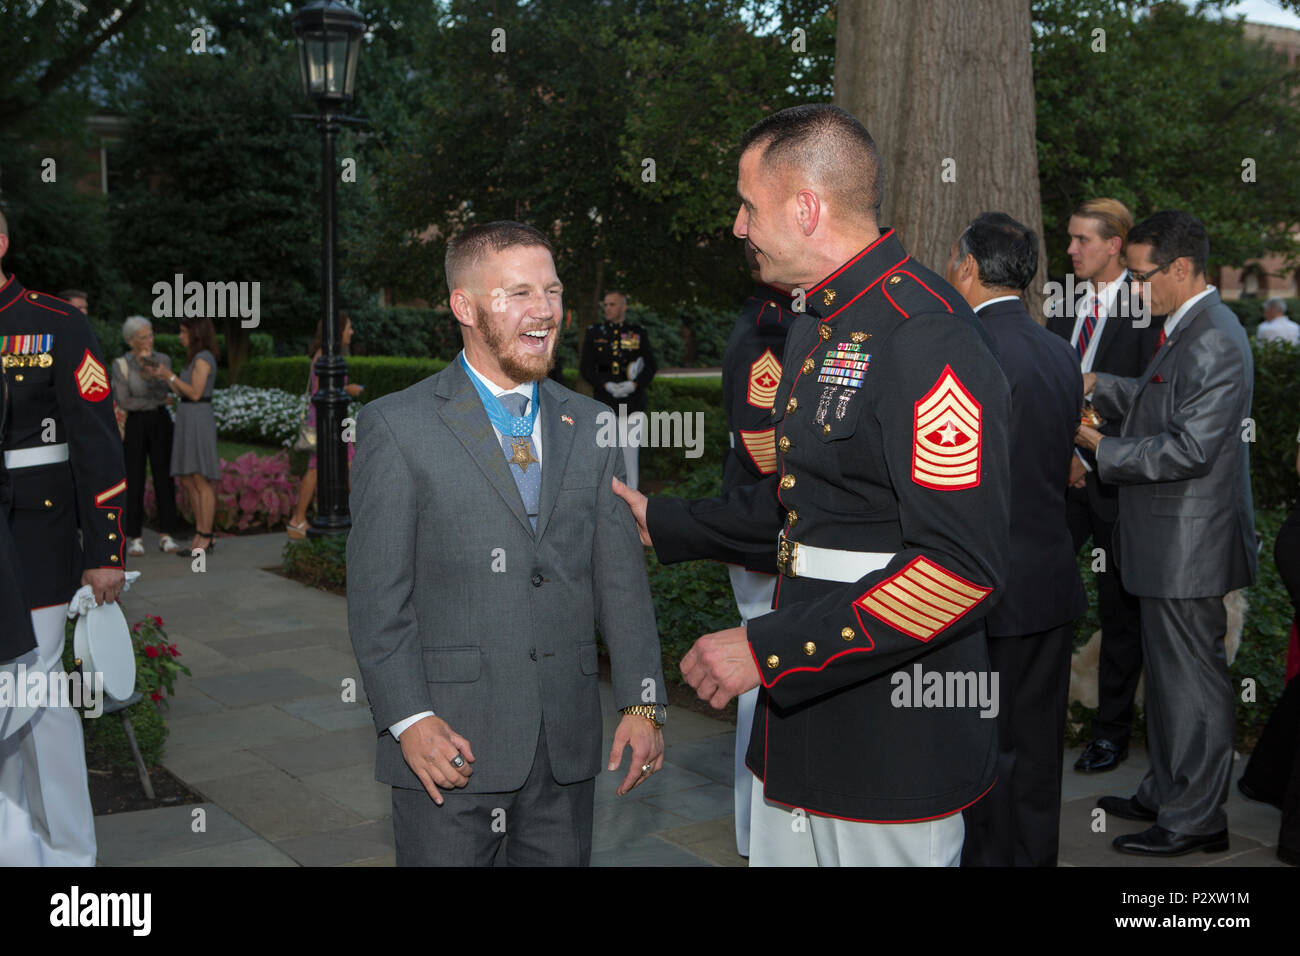 Retired U.S. Marine Corps Cpl. William Kyle Carpenter, Medal of Honor recipient, speaks to Sgt. Maj. Anthony Cruz, Sgt. Maj., Marine Corps Installations Command, during the evening parade reception in the Marine Family Garden, Marine Barracks Washington, Washington, D.C., Aug. 5, 2016. Evening parades are held as a means of honoring senior officials, distinguished citizens and supporters of the Marine Corps. (U.S. Marine Corps photo by Cpl. Christian J. Varney) Stock Photo